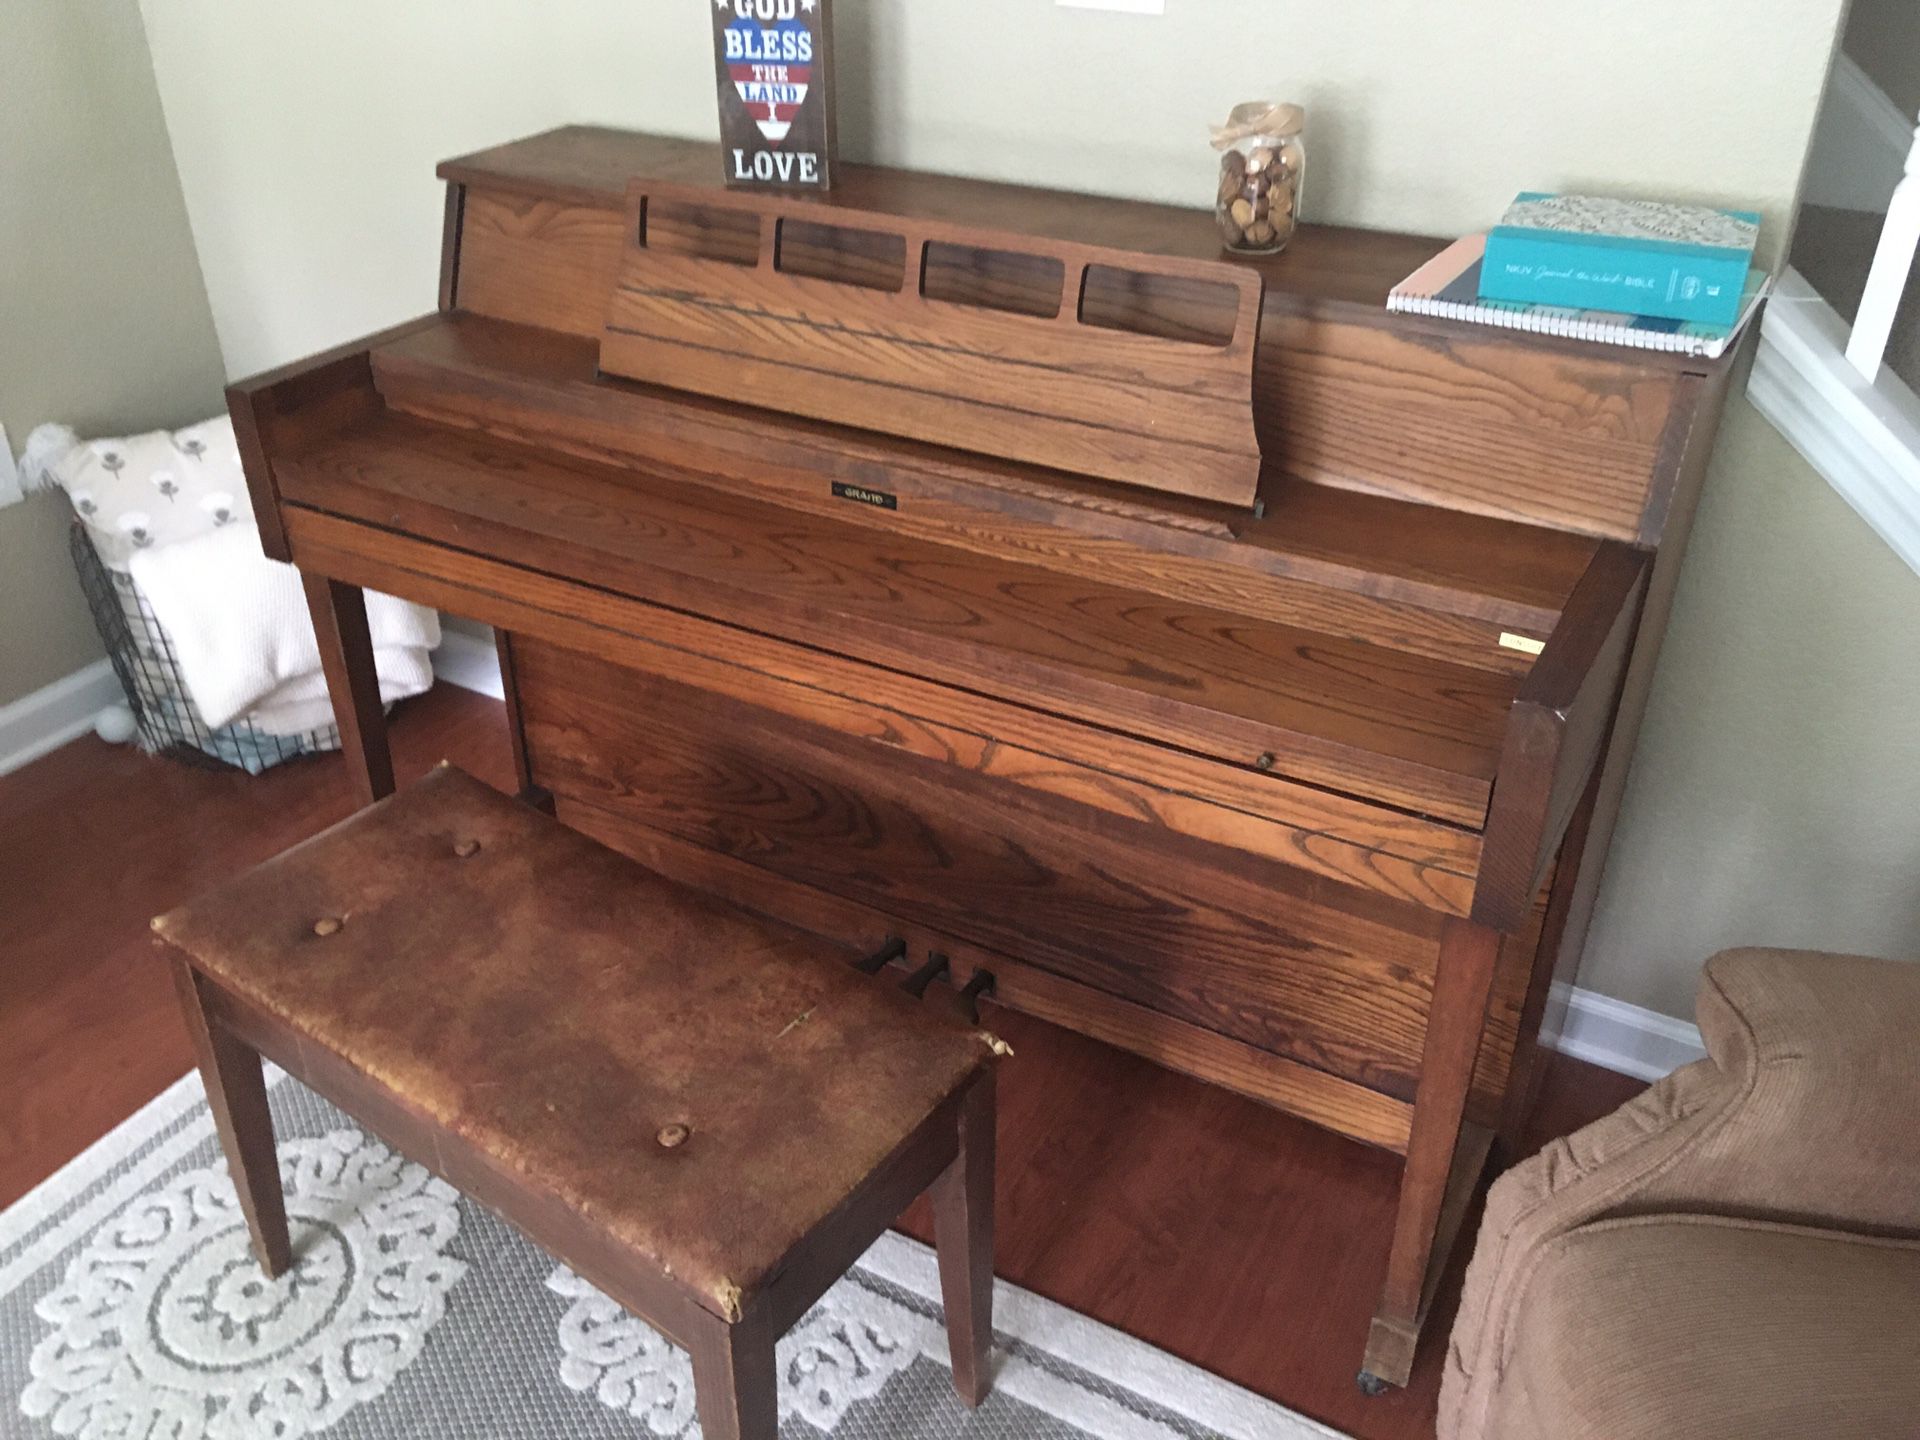 Upright Piano and Bench